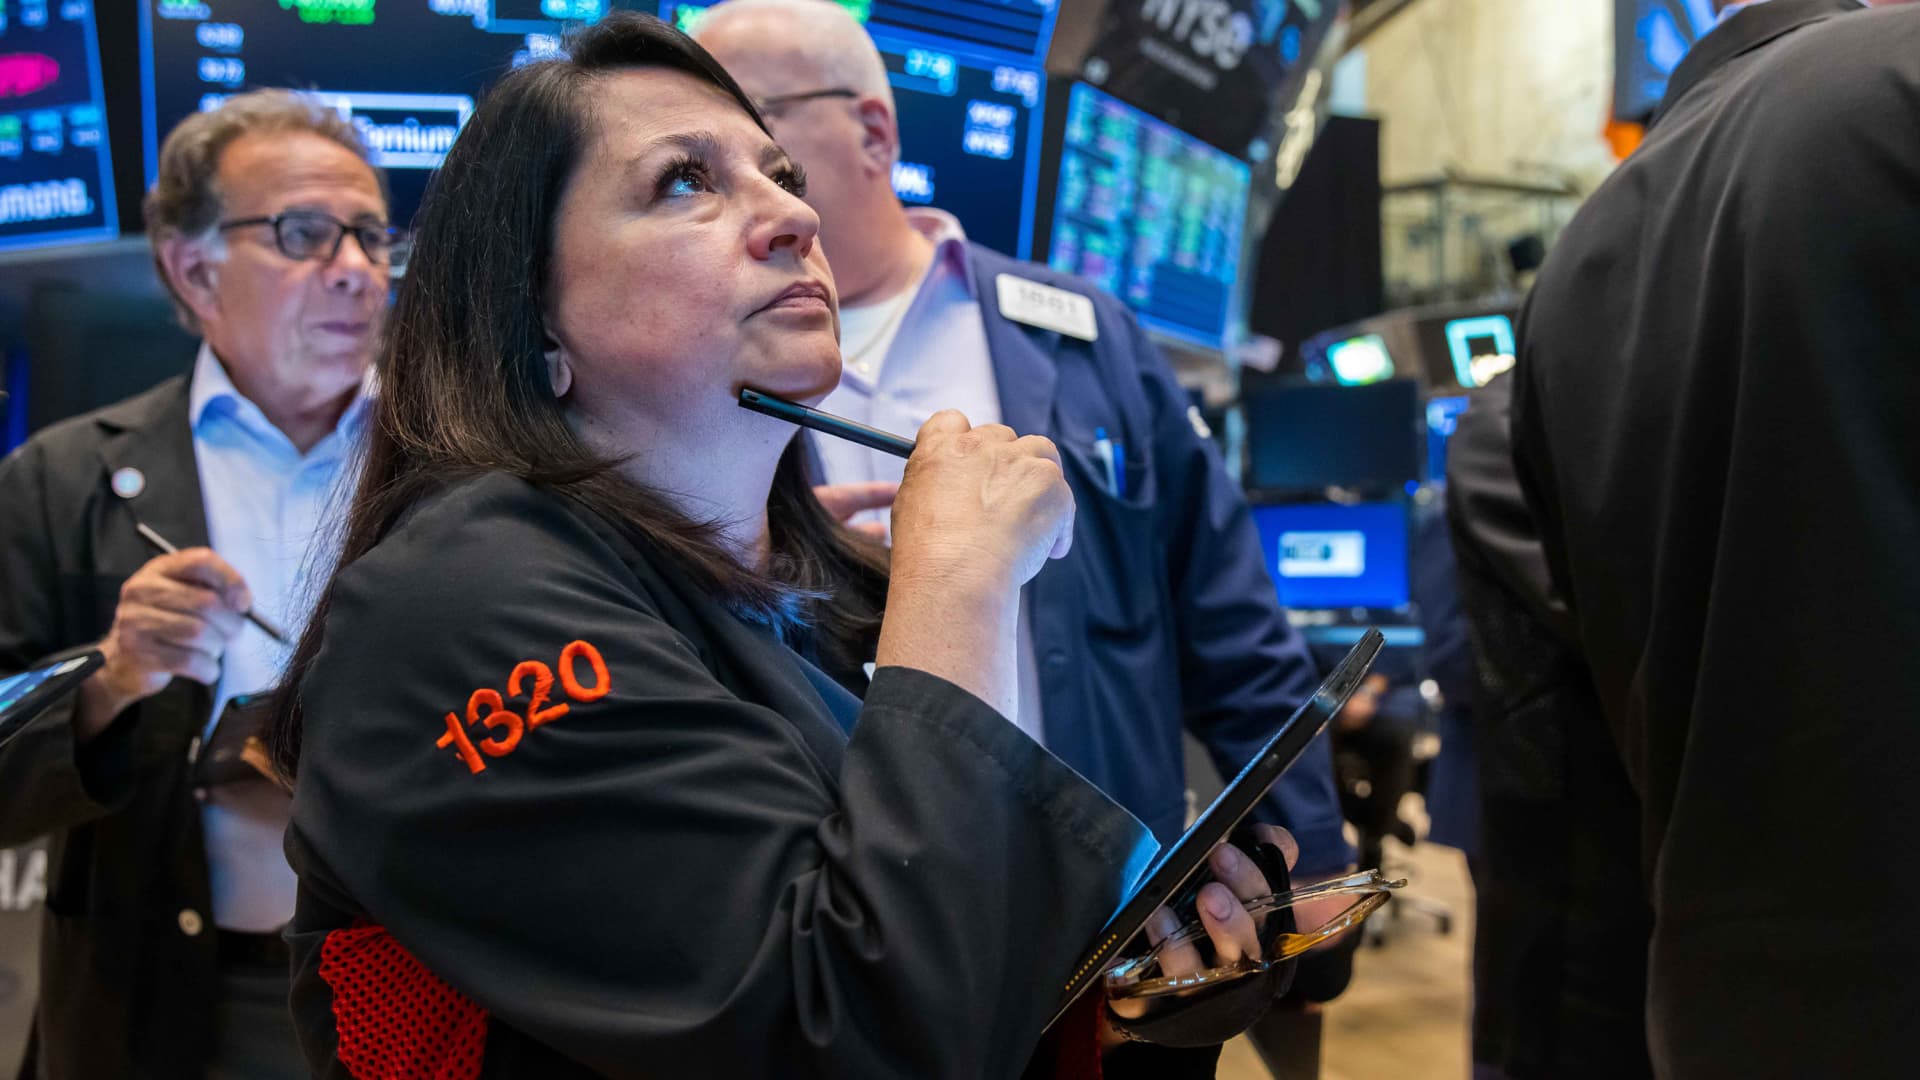 S&P 500 closes lower for a third day as rising bond yields pressure stocks: Live updates